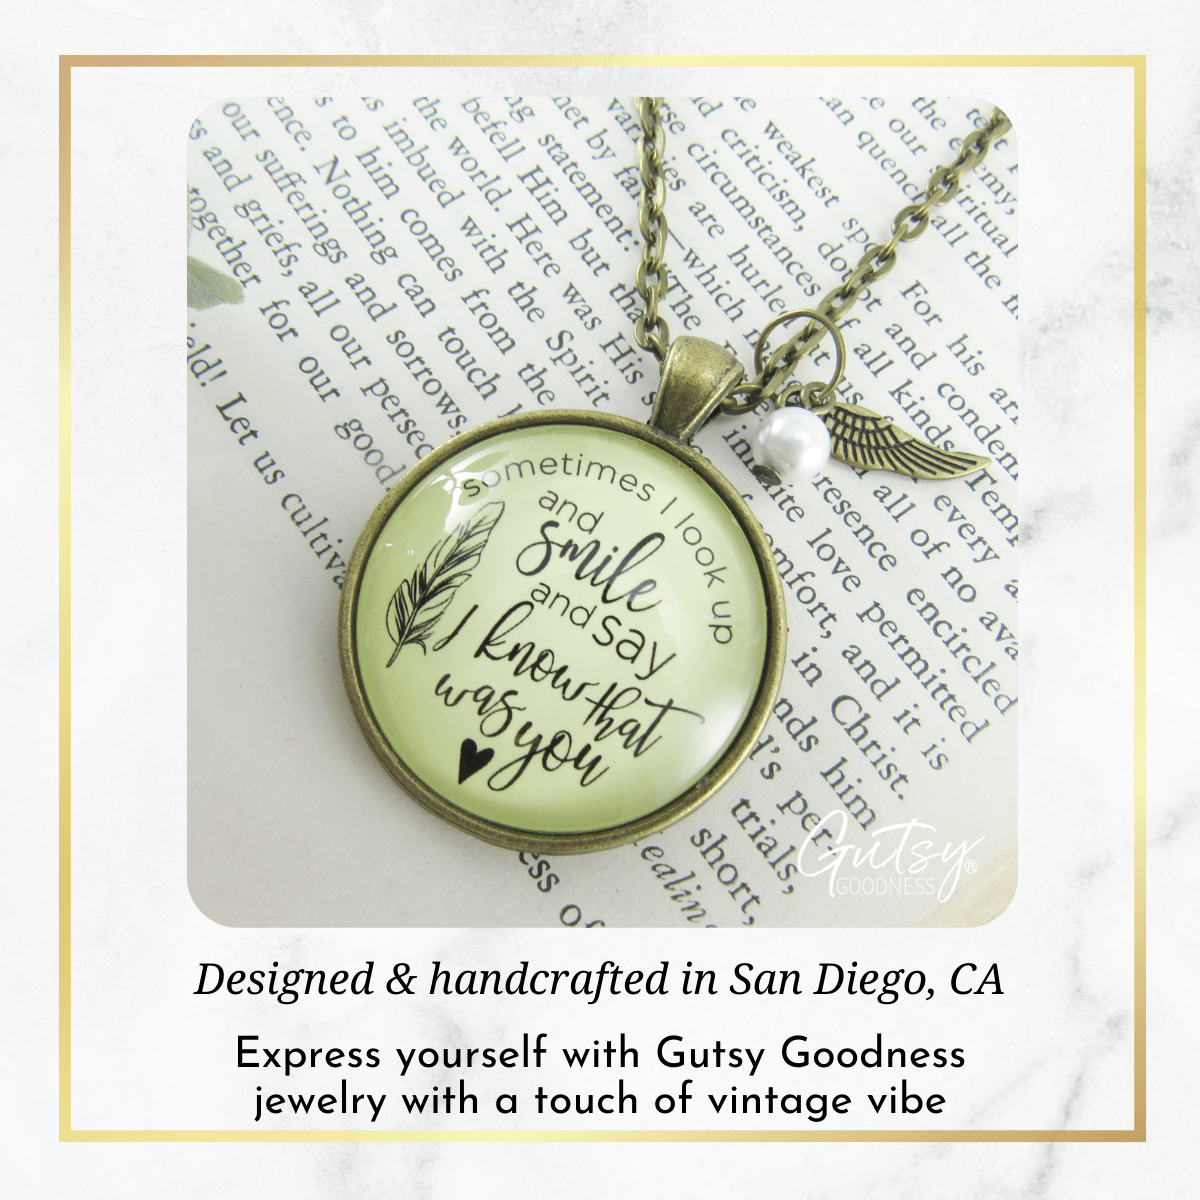 Gutsy Goodness Memorial Necklace Sometimes Times I Look Up Miss You Remembrance Gift - Gutsy Goodness Handmade Jewelry;Memorial Necklace Sometimes Times I Look Up Miss You Remembrance Gift - Gutsy Goodness Handmade Jewelry Gifts